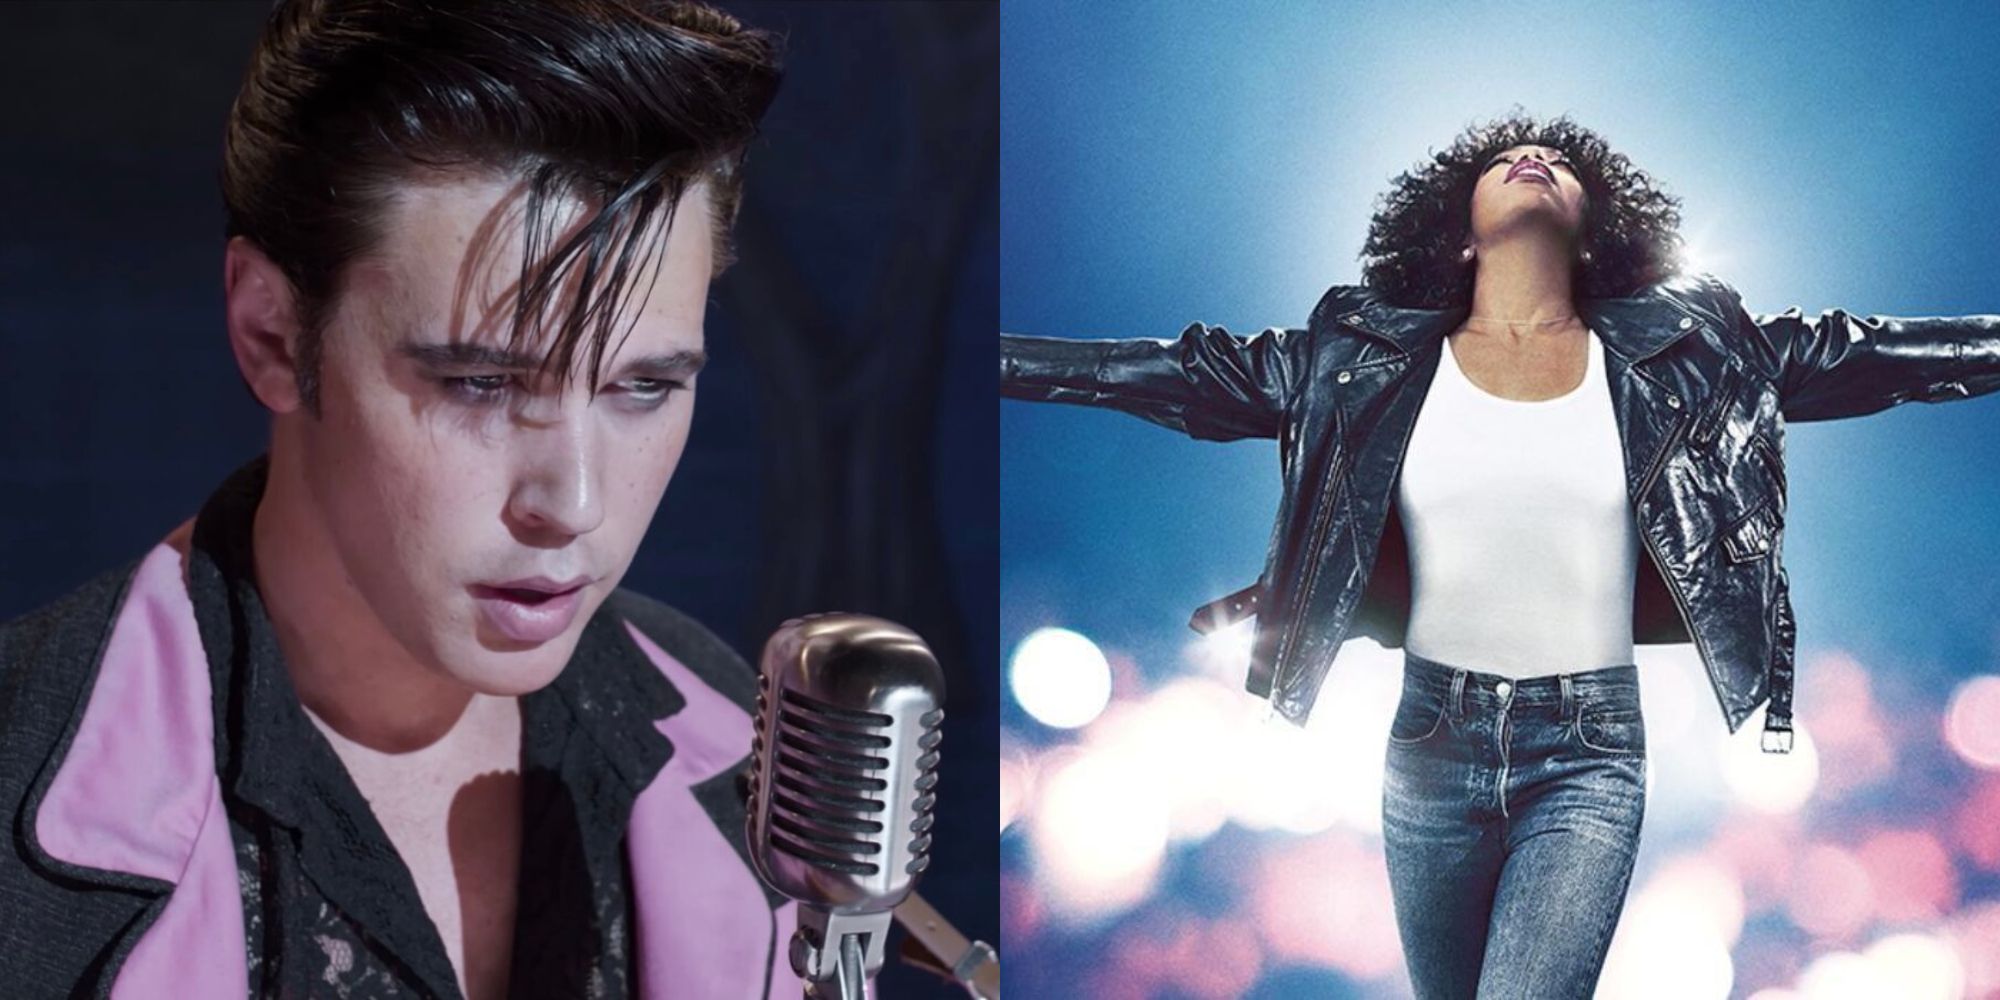 Split image showing Elvis in Elvis and Whitney Houston in I Wanna Dance With Somebody.